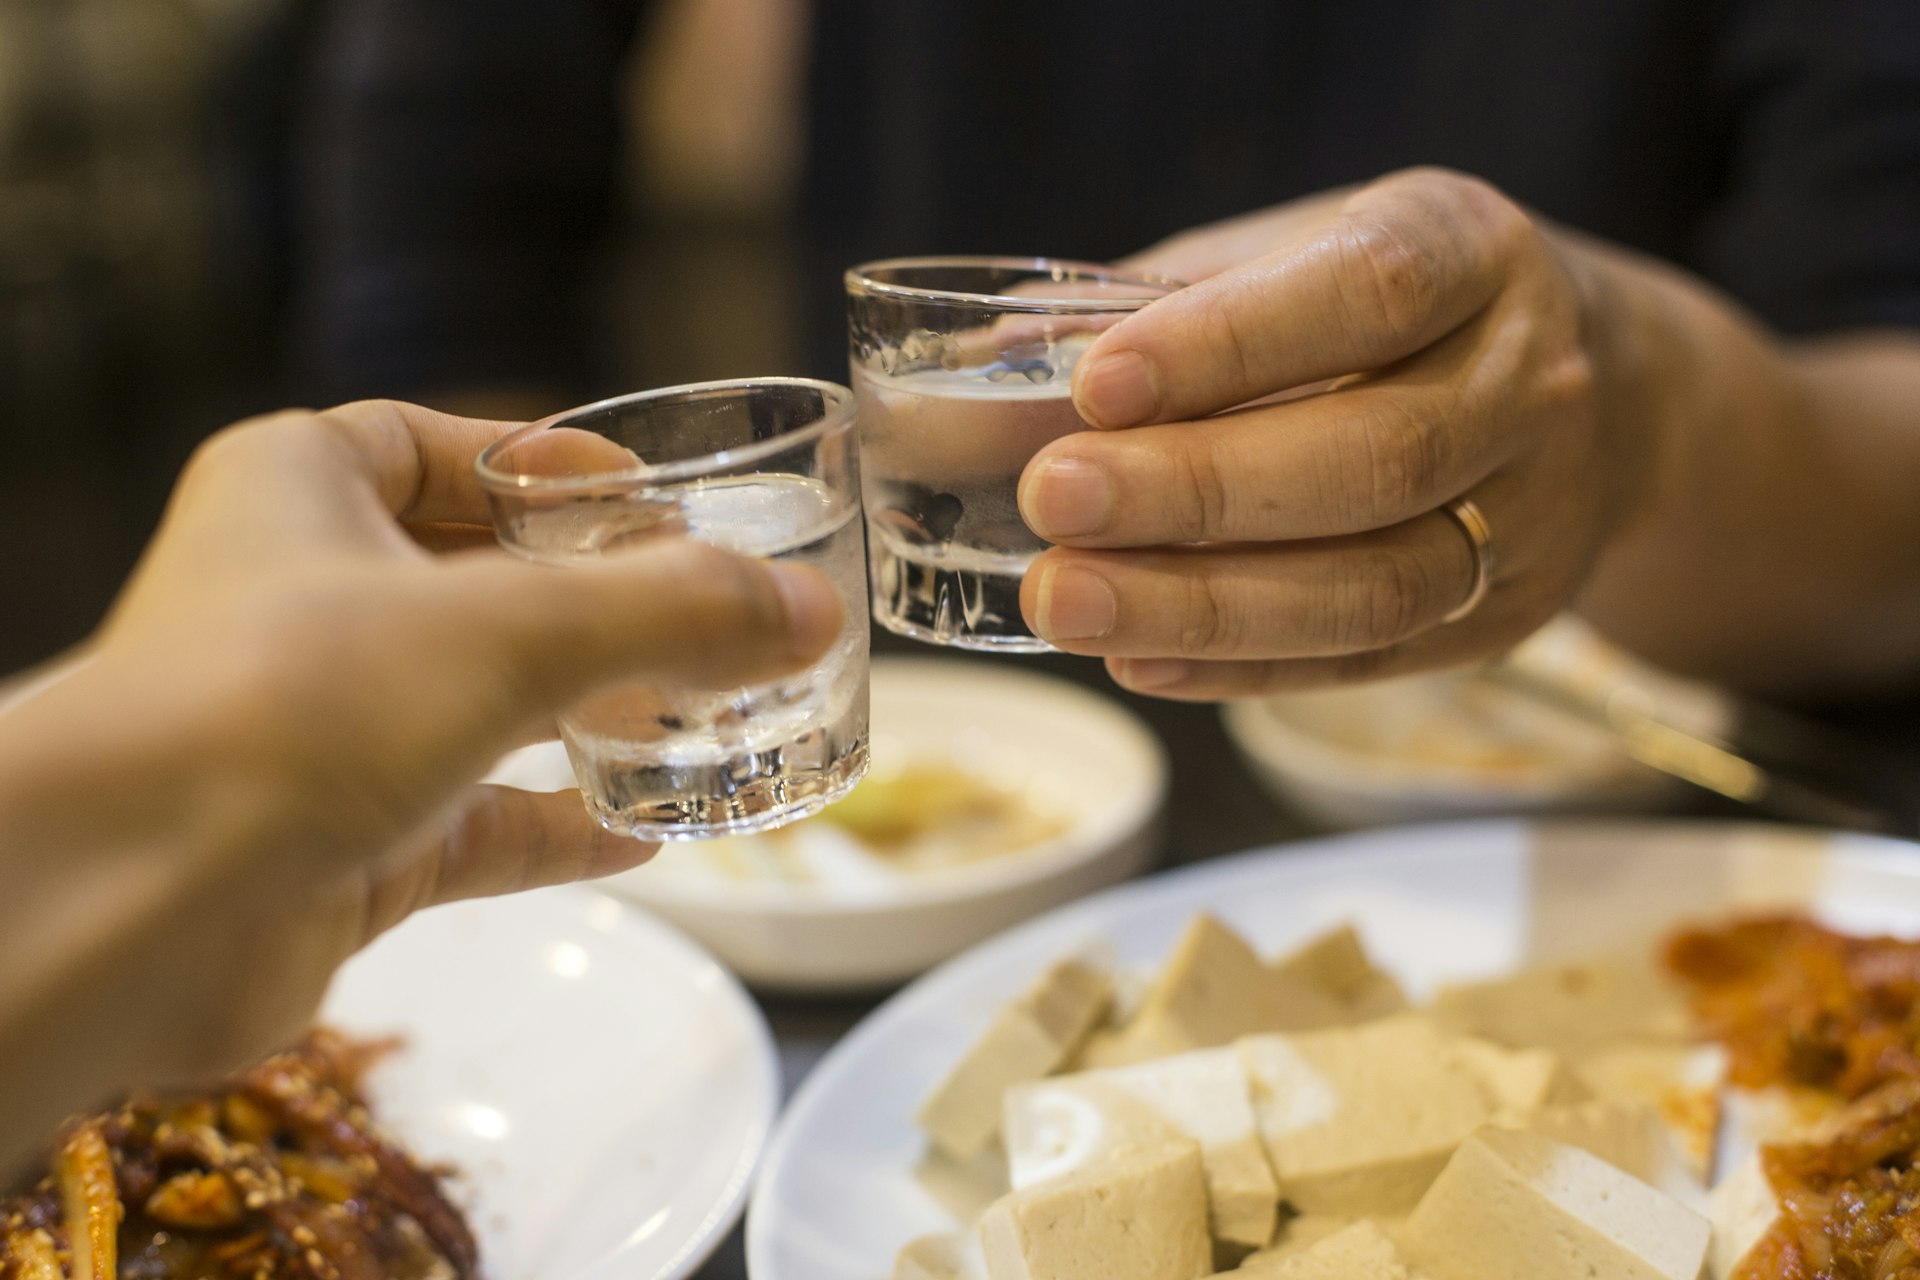 Two people toast with soju at a restaurant in South Korea, Asia